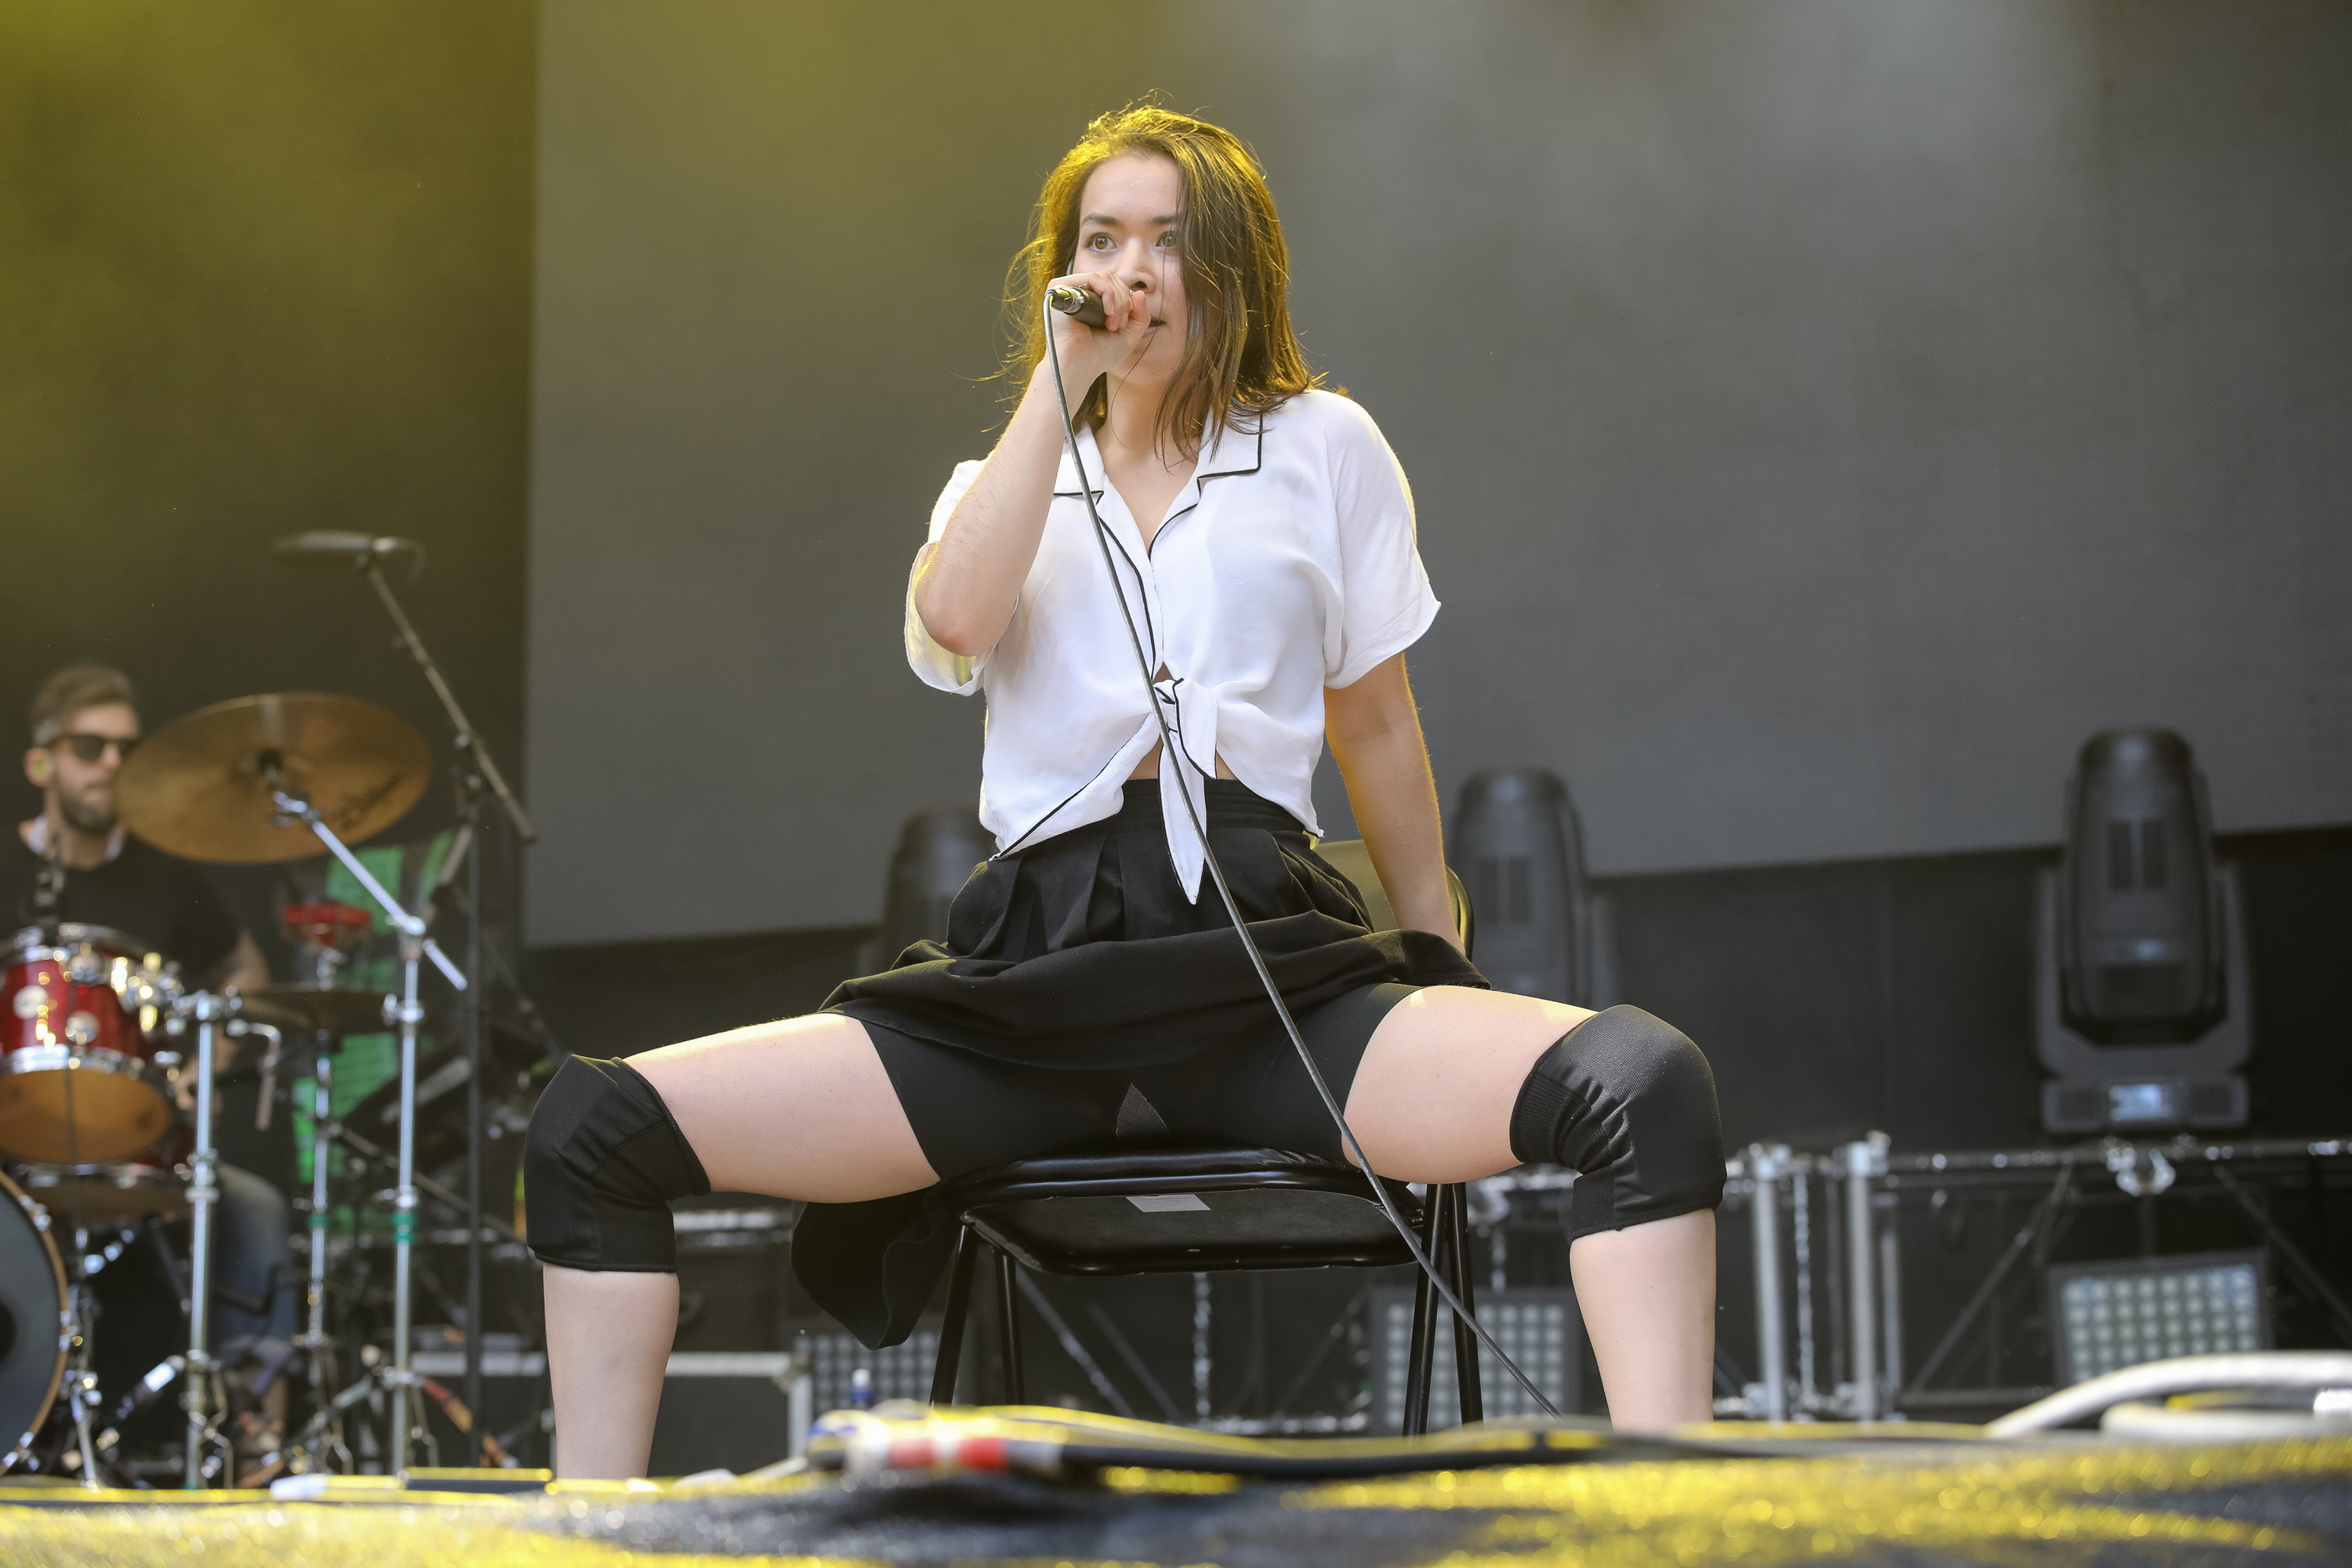 Mitski performing at St Jerome's Laneway Festival in 2019, in Auckland, New Zealand. | Source: Getty Images